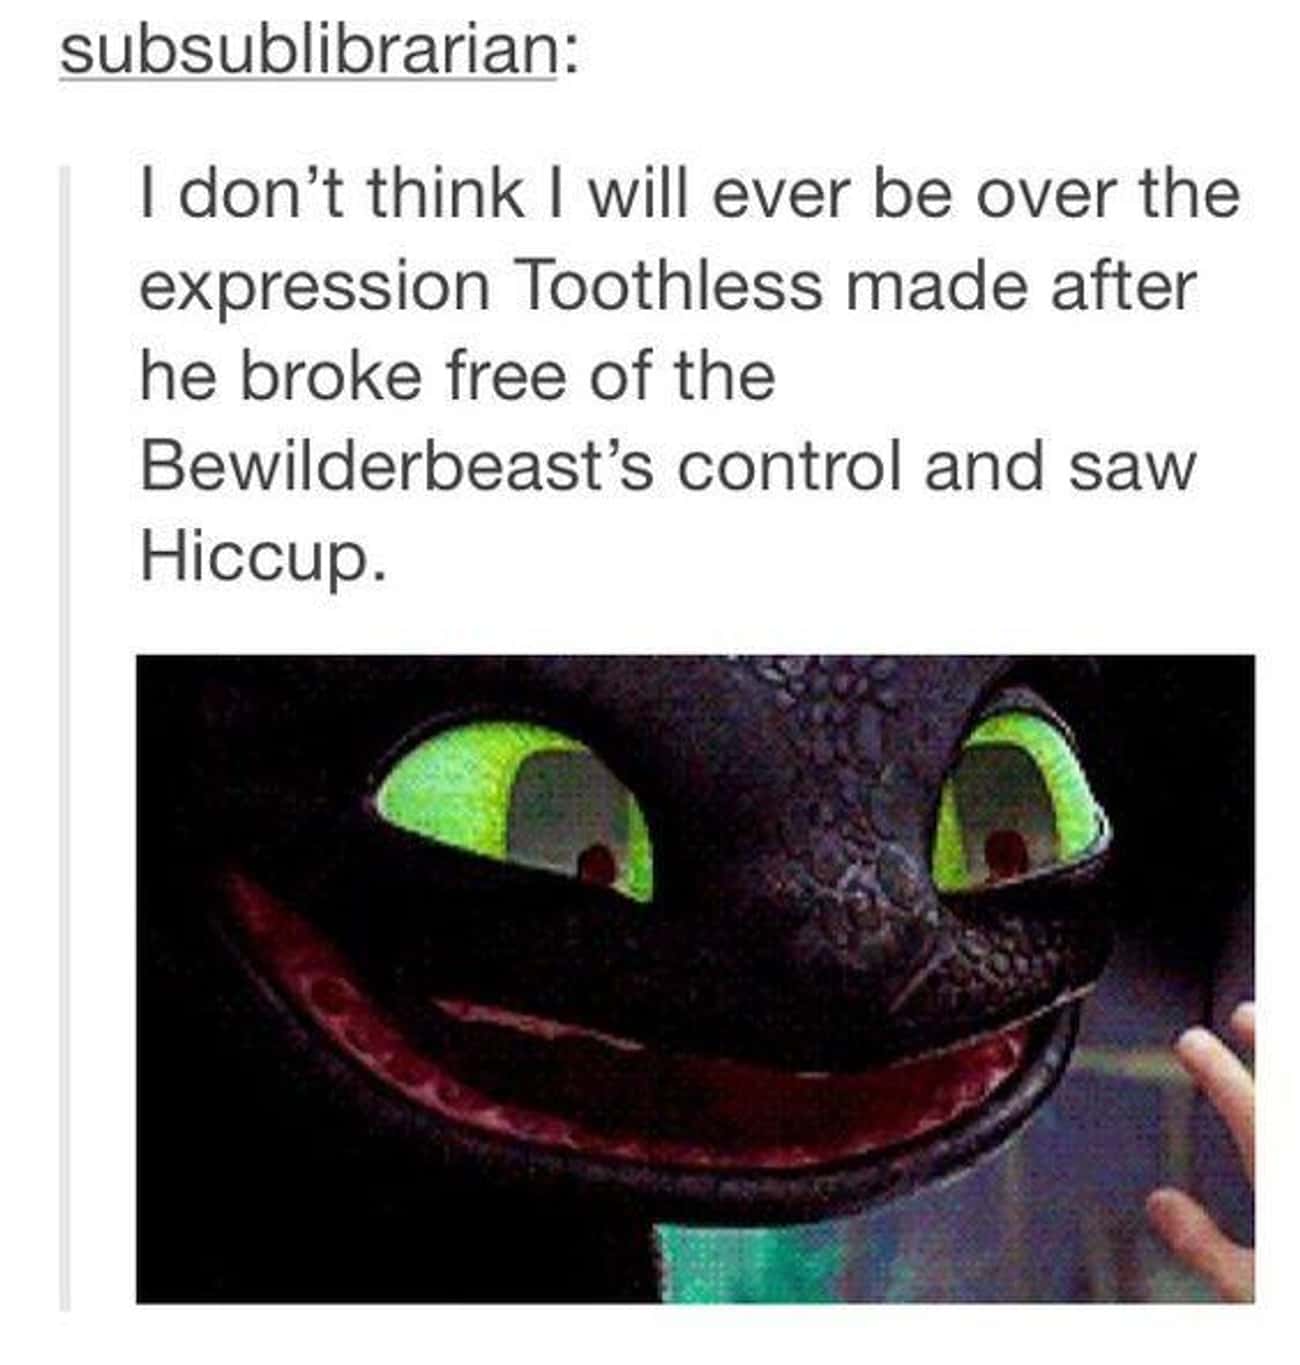 The Priceless Expression Toothless Made 